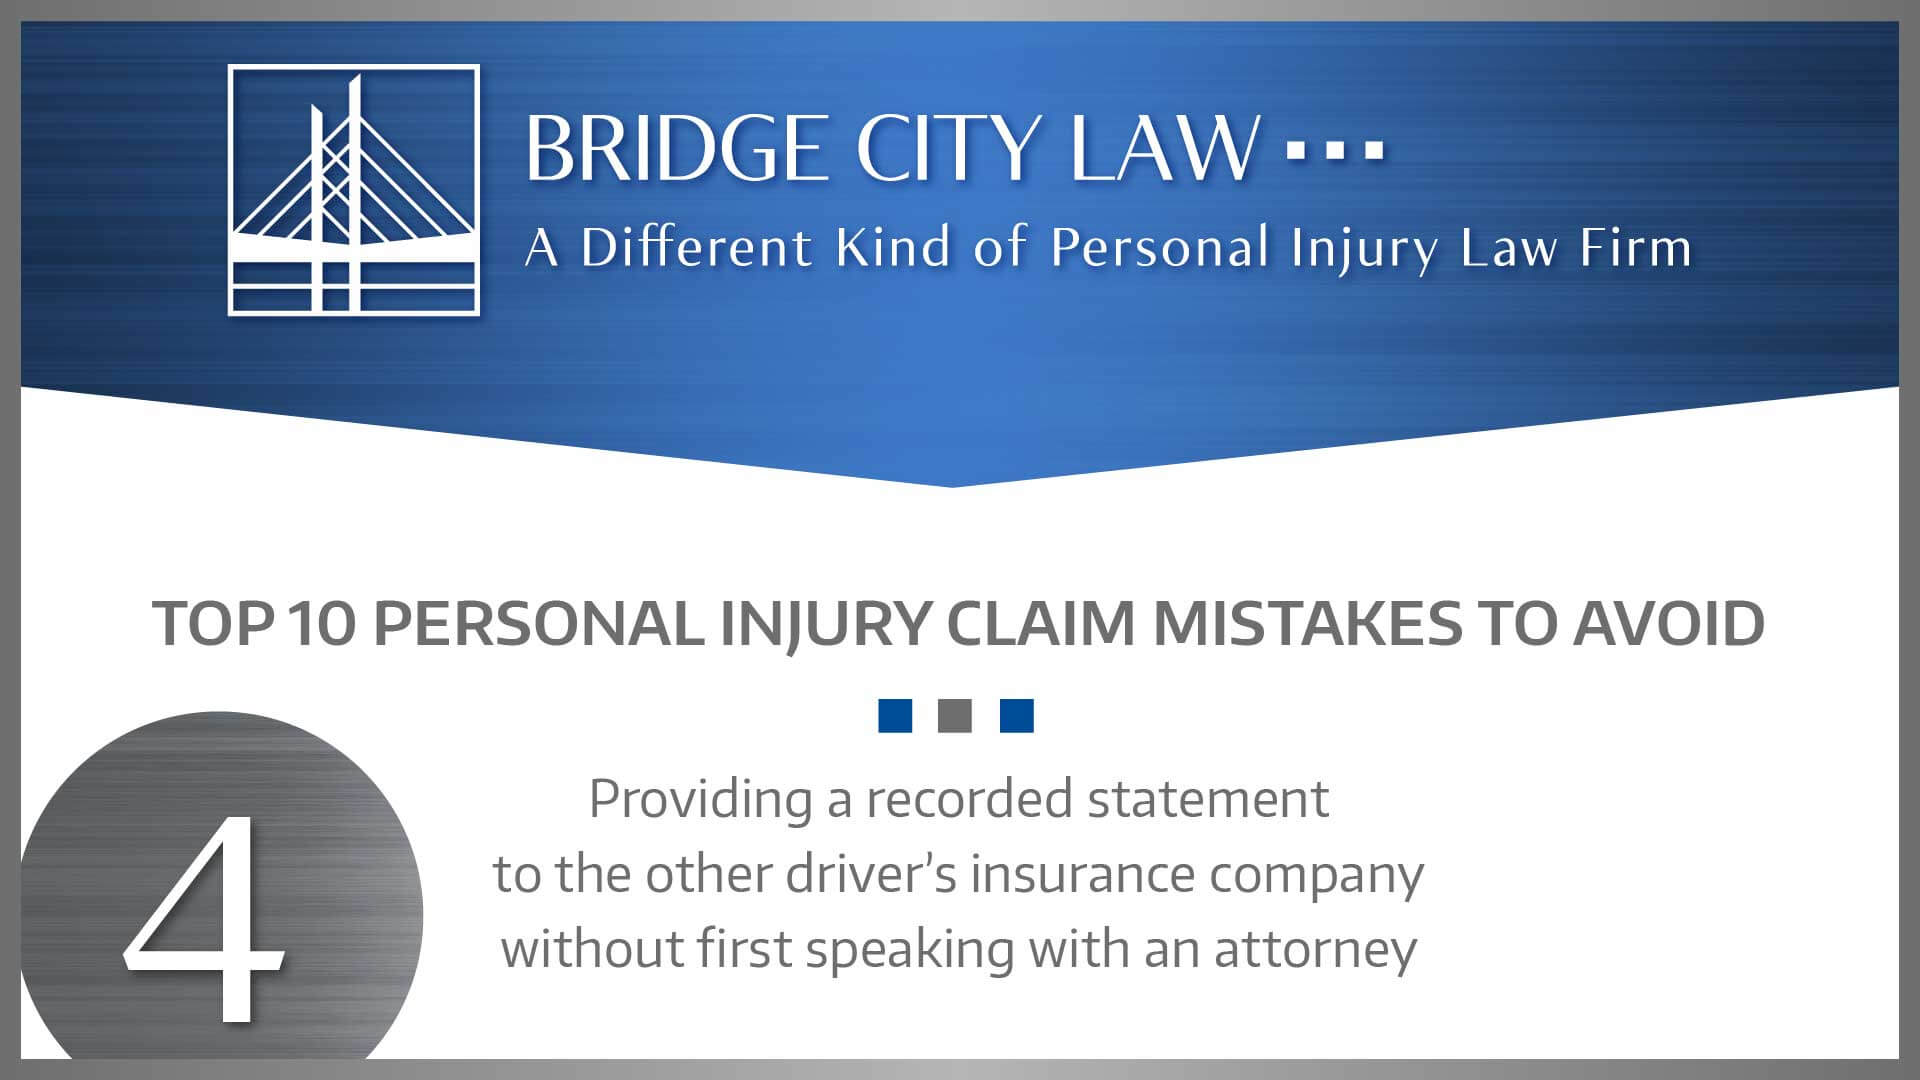 #4 MISTAKE: Providing a recorded statement to the other driver’s insurance company without first speaking with an attorney